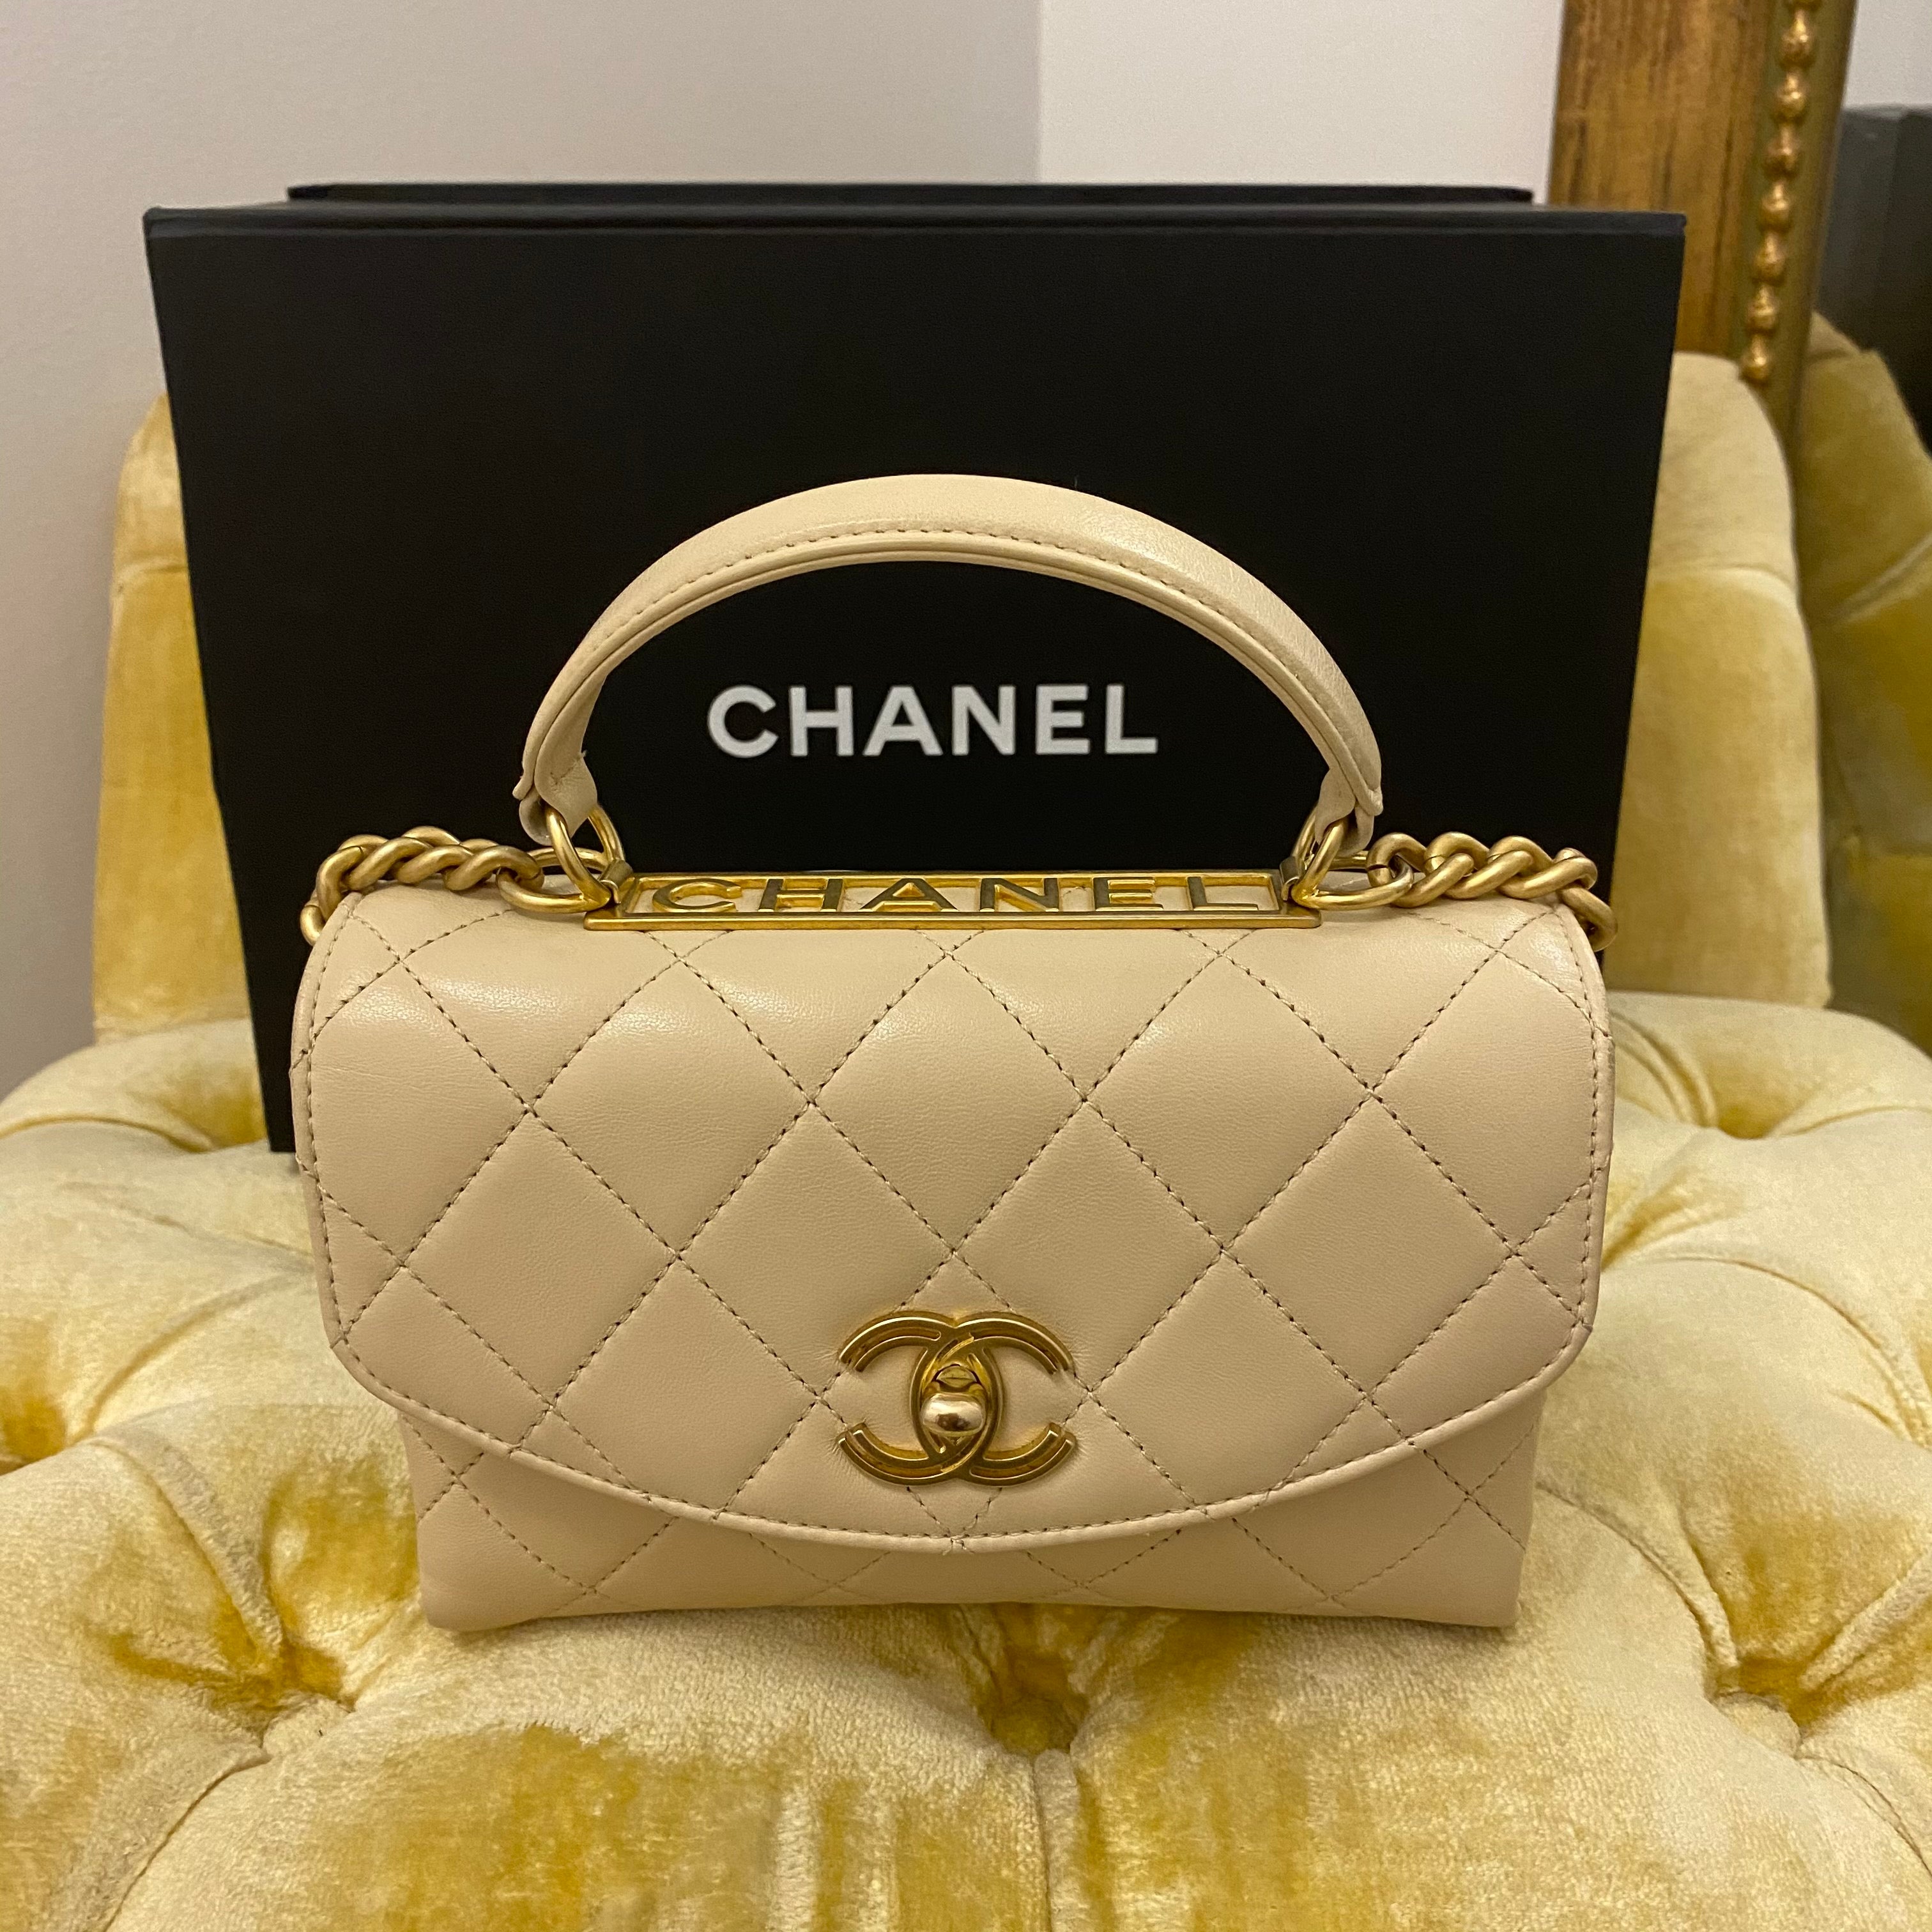 CHANEL, Bags, Chanel Lambskin Quilted Trendy Cc Dual Handle Flap Bag  Beige